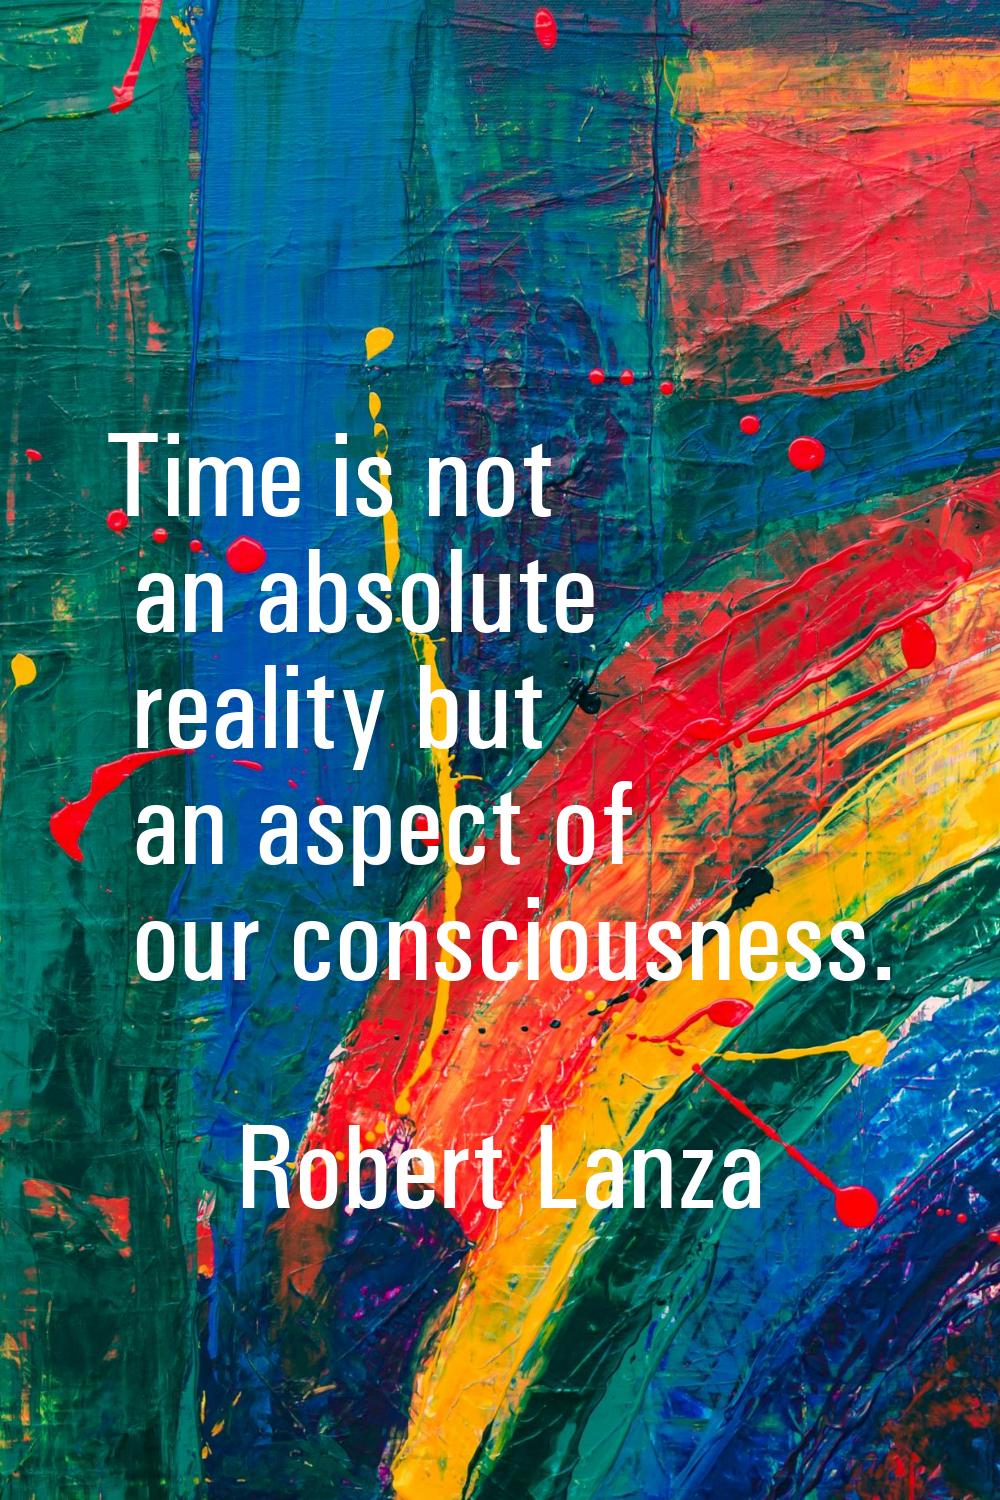 Time is not an absolute reality but an aspect of our consciousness.